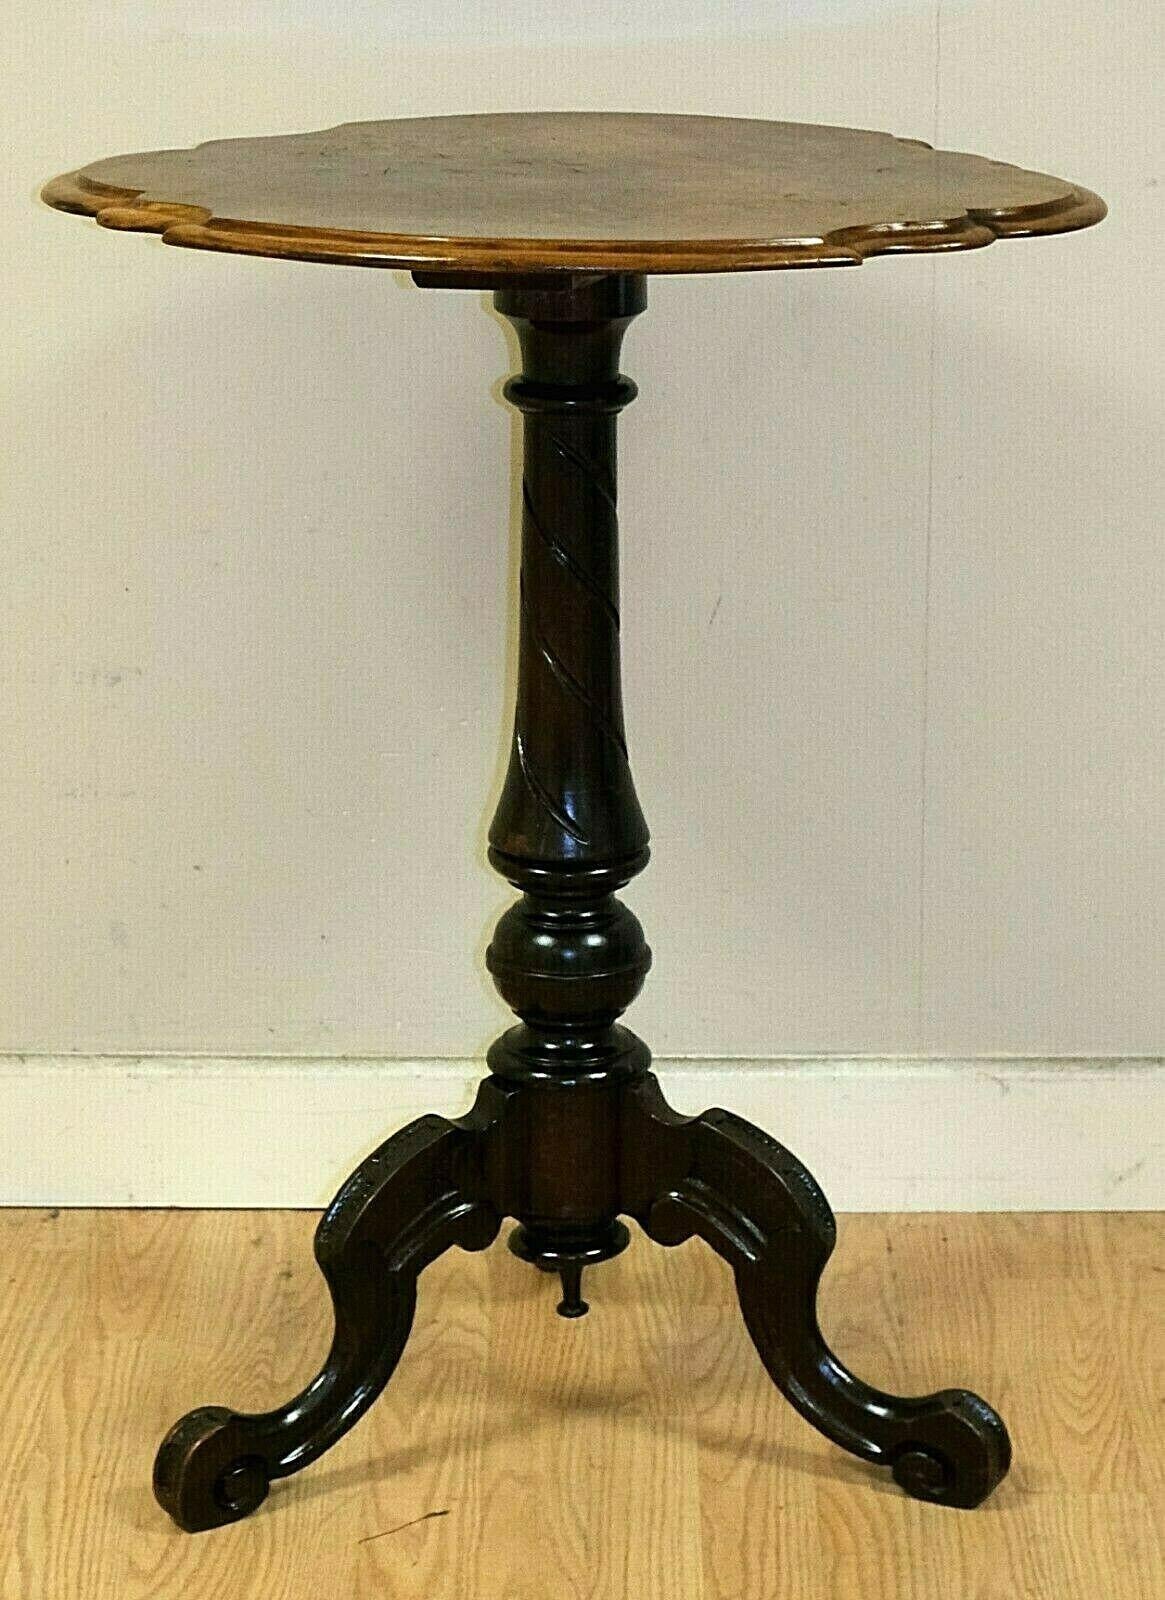 We are delighted to offer for sale this elegant burr walnut side tripod table with scalloped edge.

The particular shape of table will look attractive in any room. The carving on the legs is simple yet makes a perfect combination with the rest of